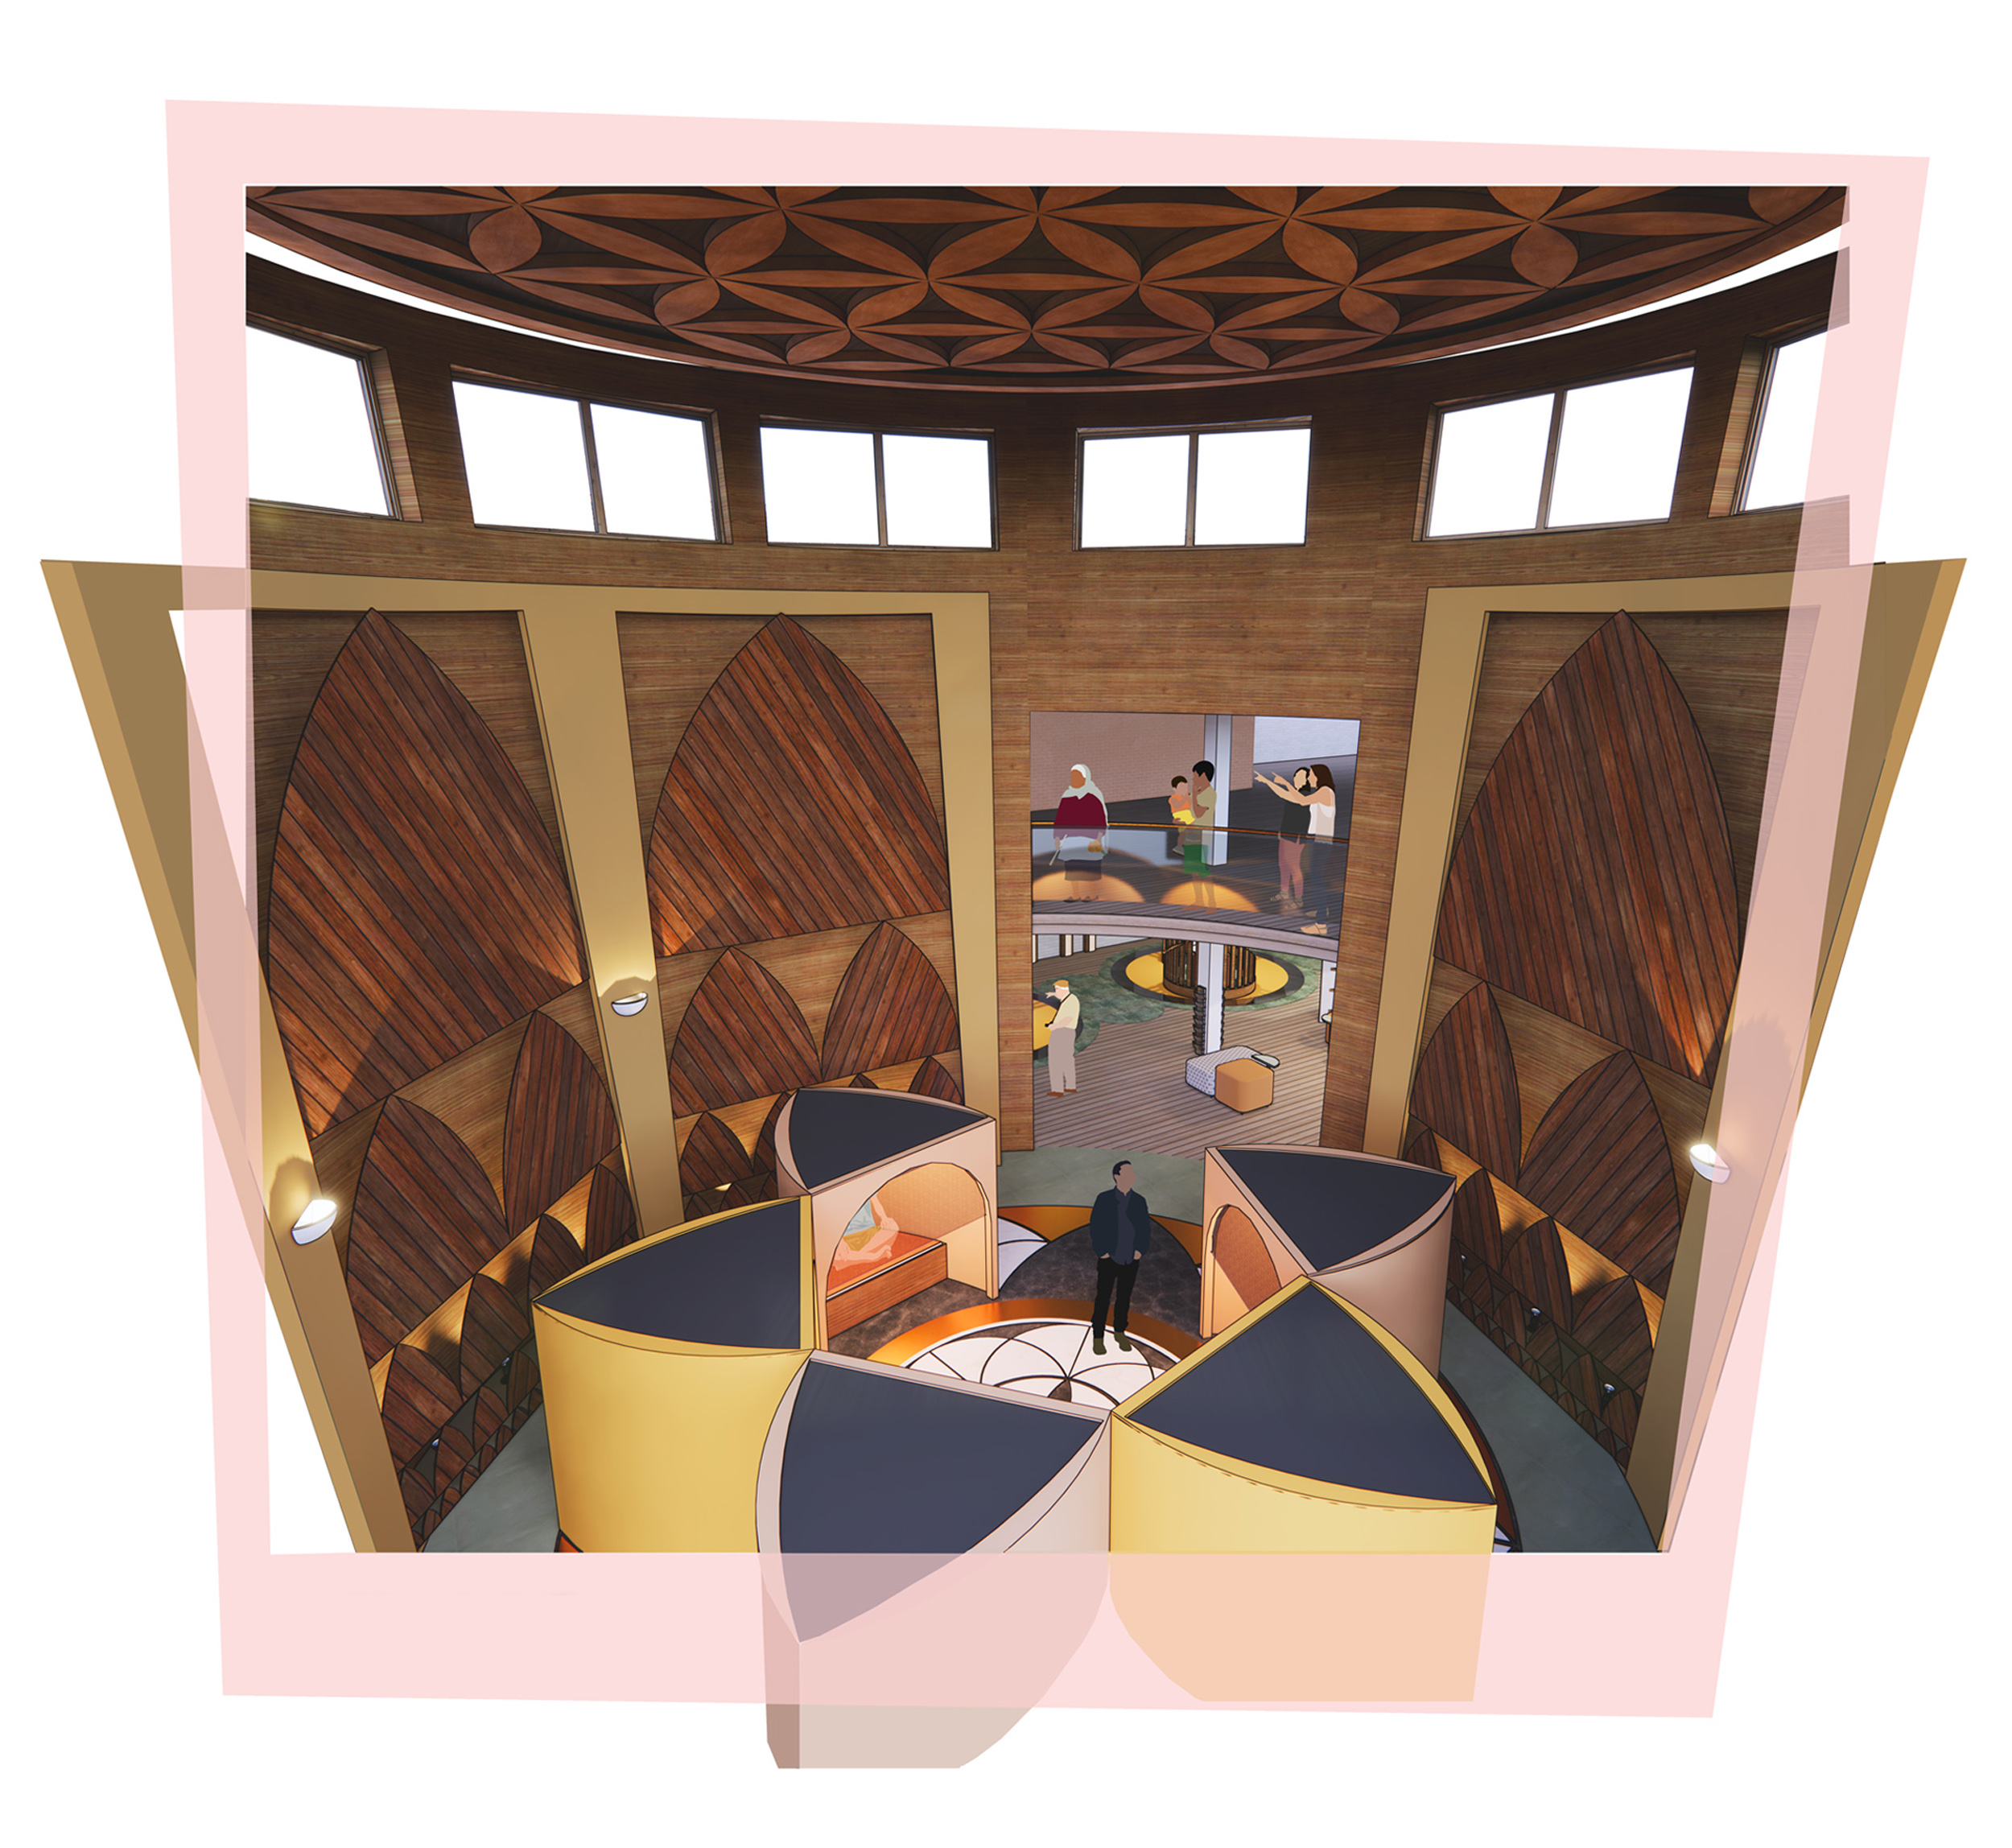 BA Interior Design work by Chloe Read showing a 3D rendered perspective of the Spiritual Space.